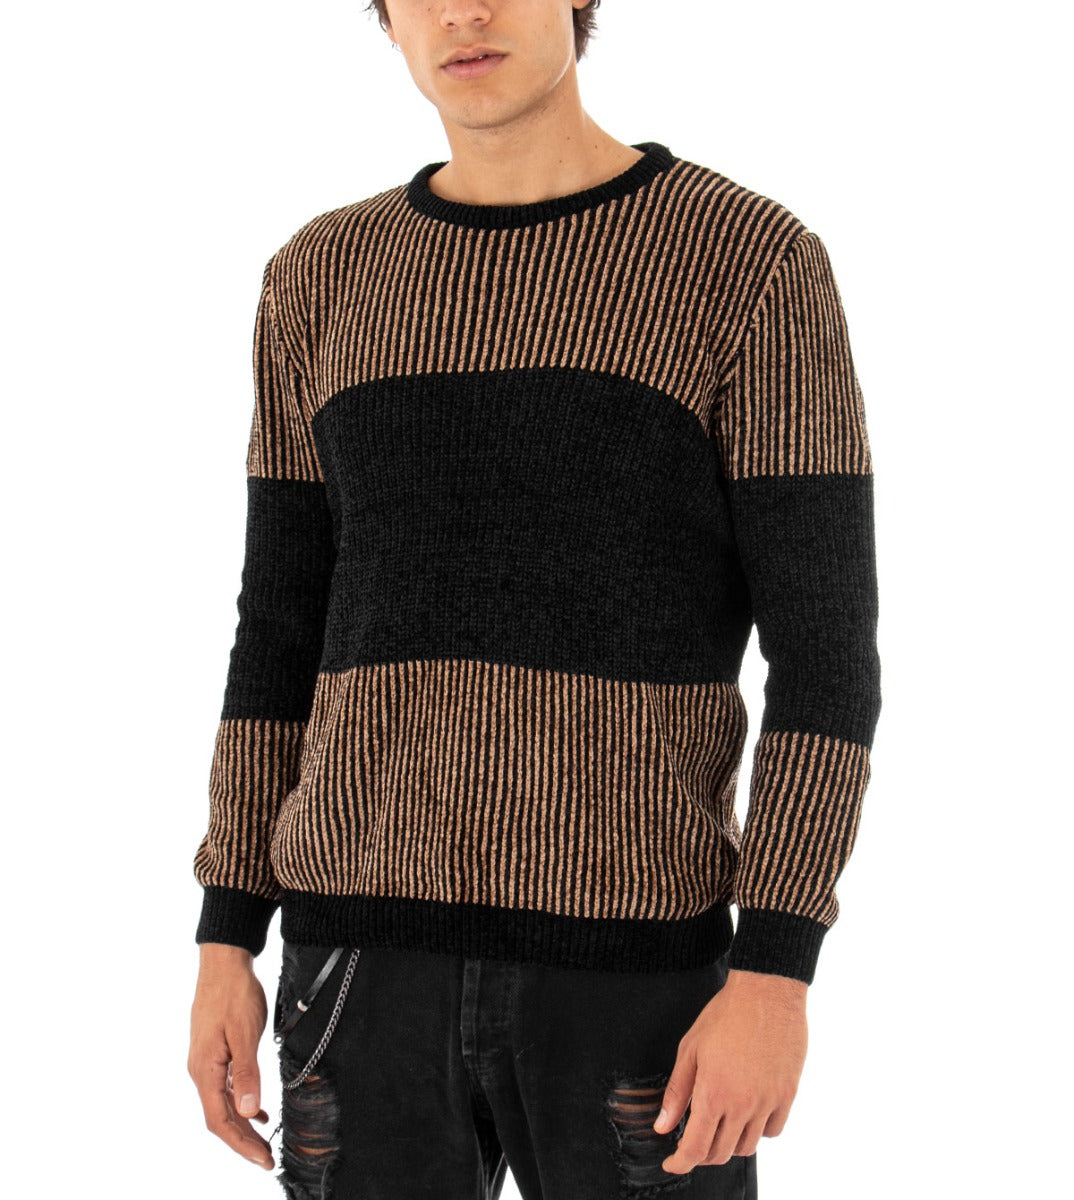 Men's Crew Neck Two-Tone Sweater Black Camel Casual Long Sleeves Striped Pullover GIOSAL